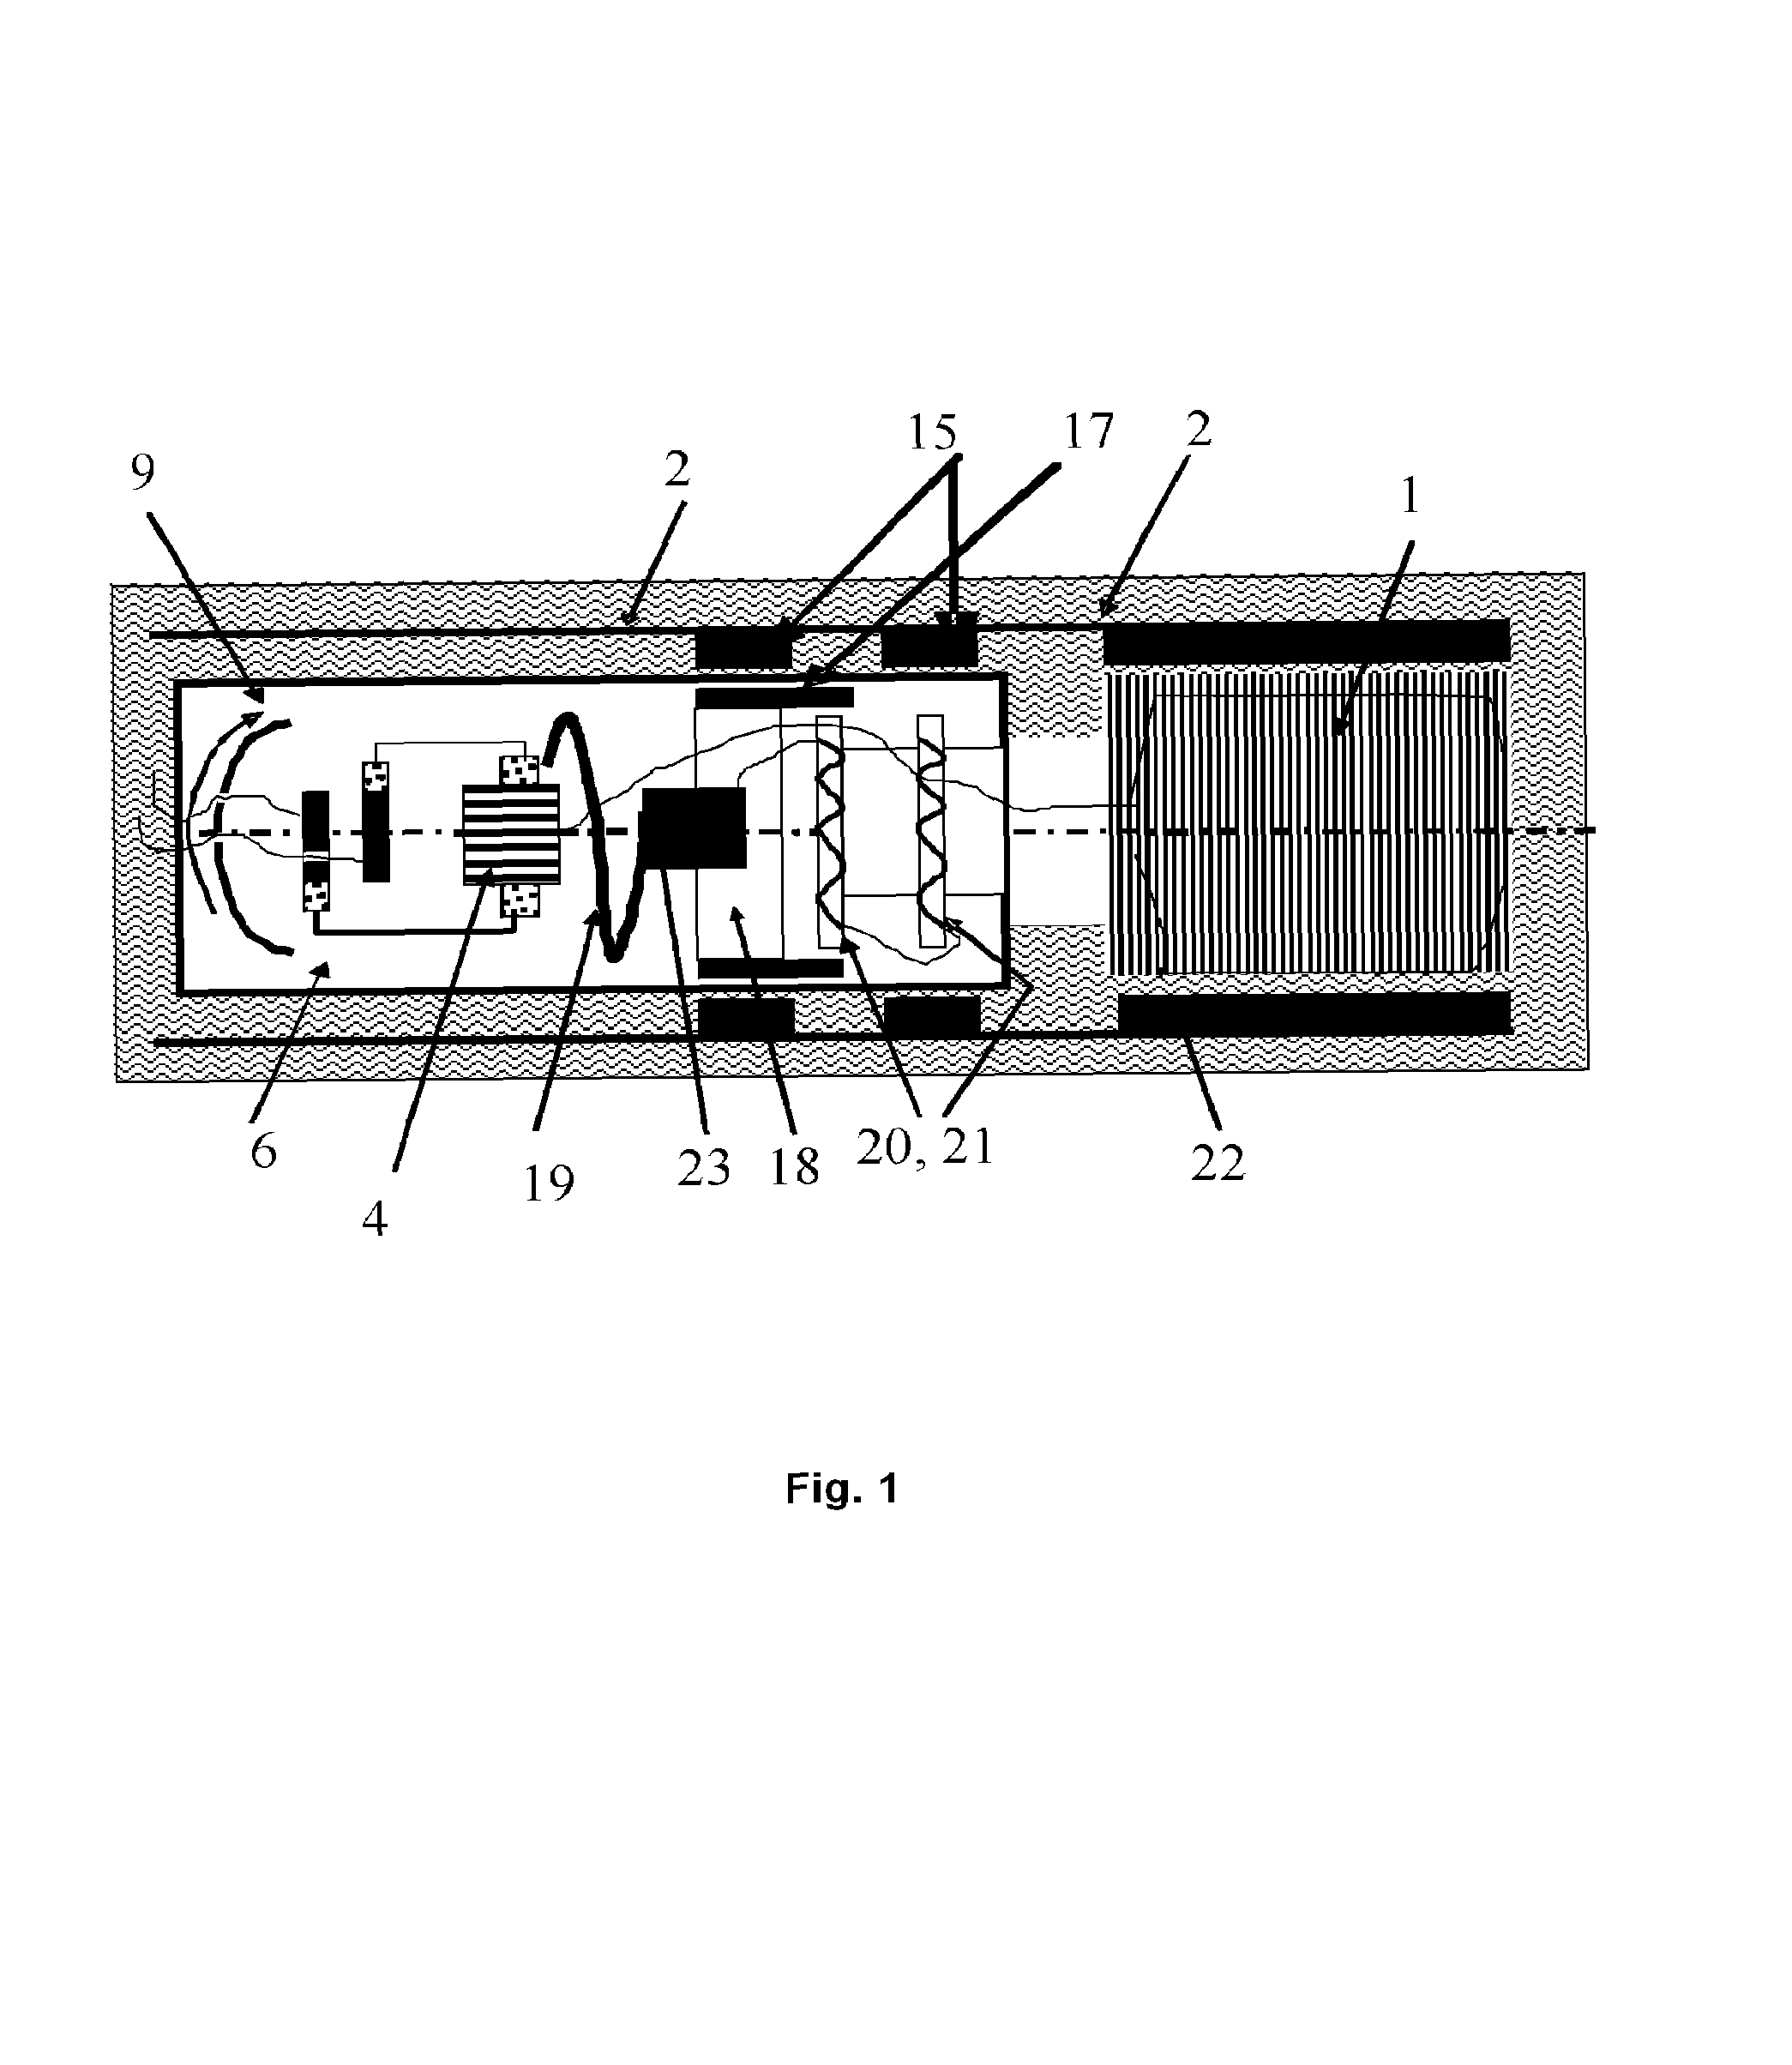 Submersible direct-current electric motor